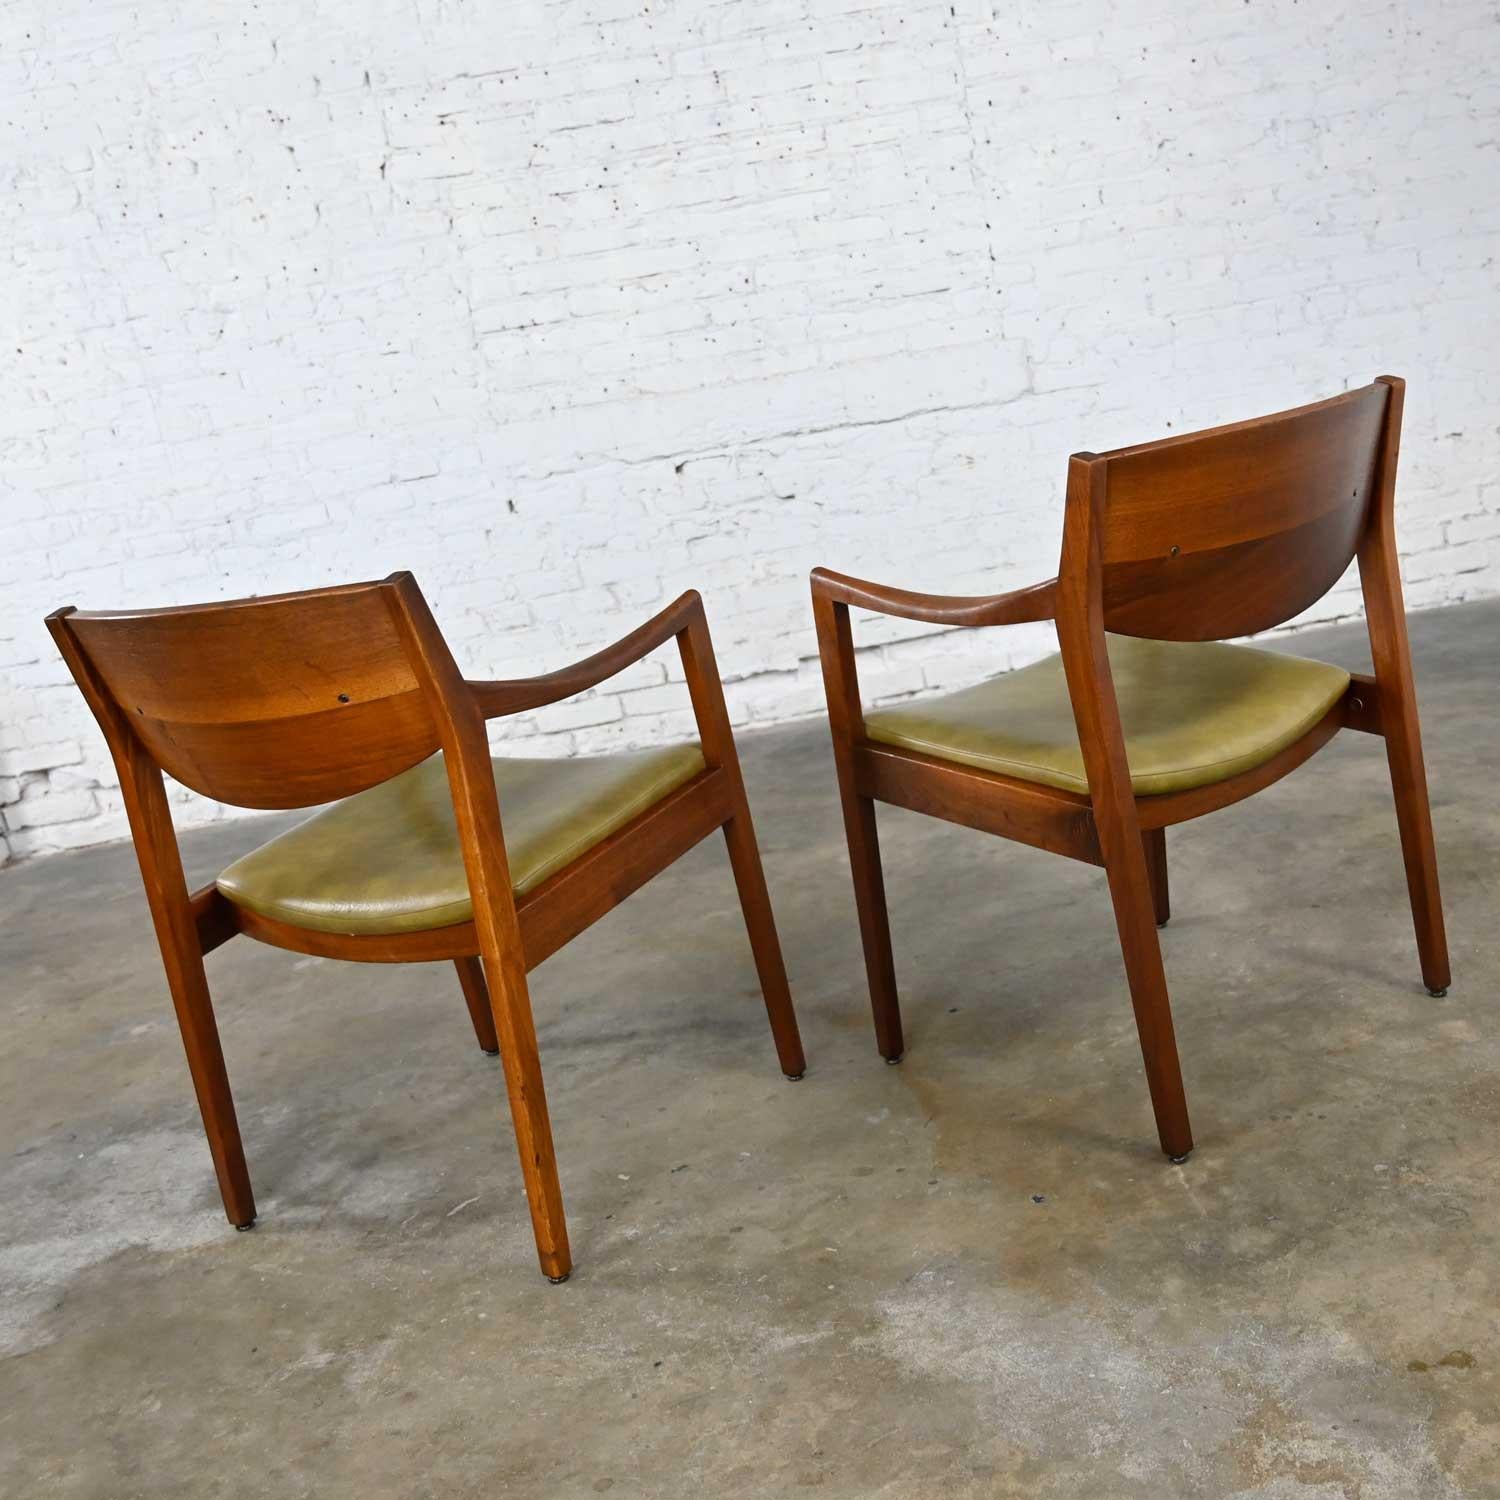 20th Century 2 Mid-Century Modern Solid Walnut & Olive Green Faux Leather Chairs by Gunlocke